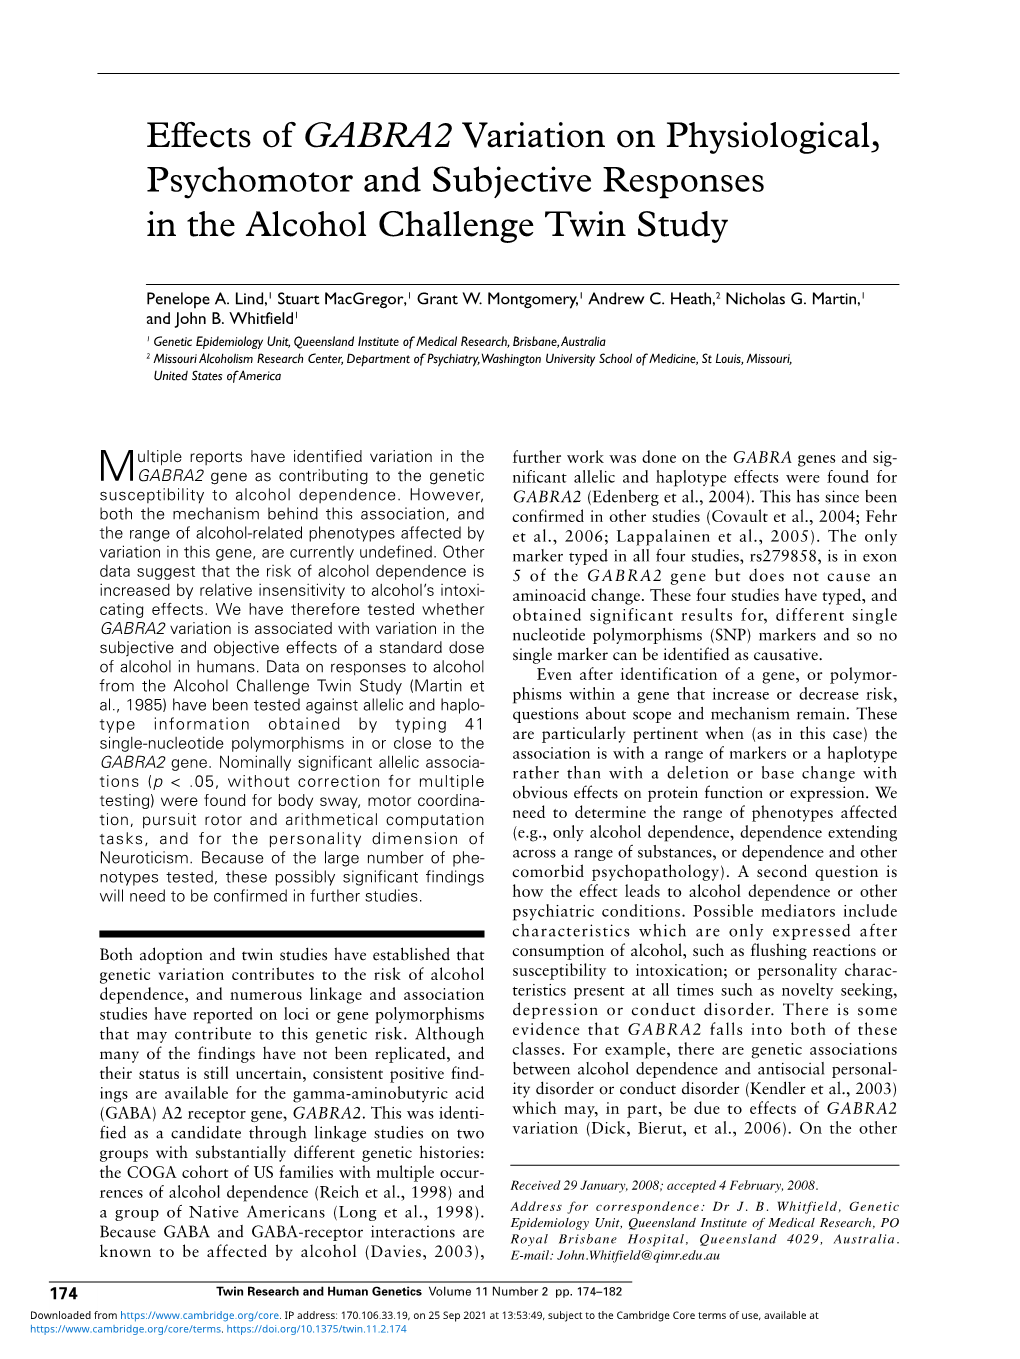 Effects of GABRA2 Variation on Physiological, Psychomotor and Subjective Responses in the Alcohol Challenge Twin Study